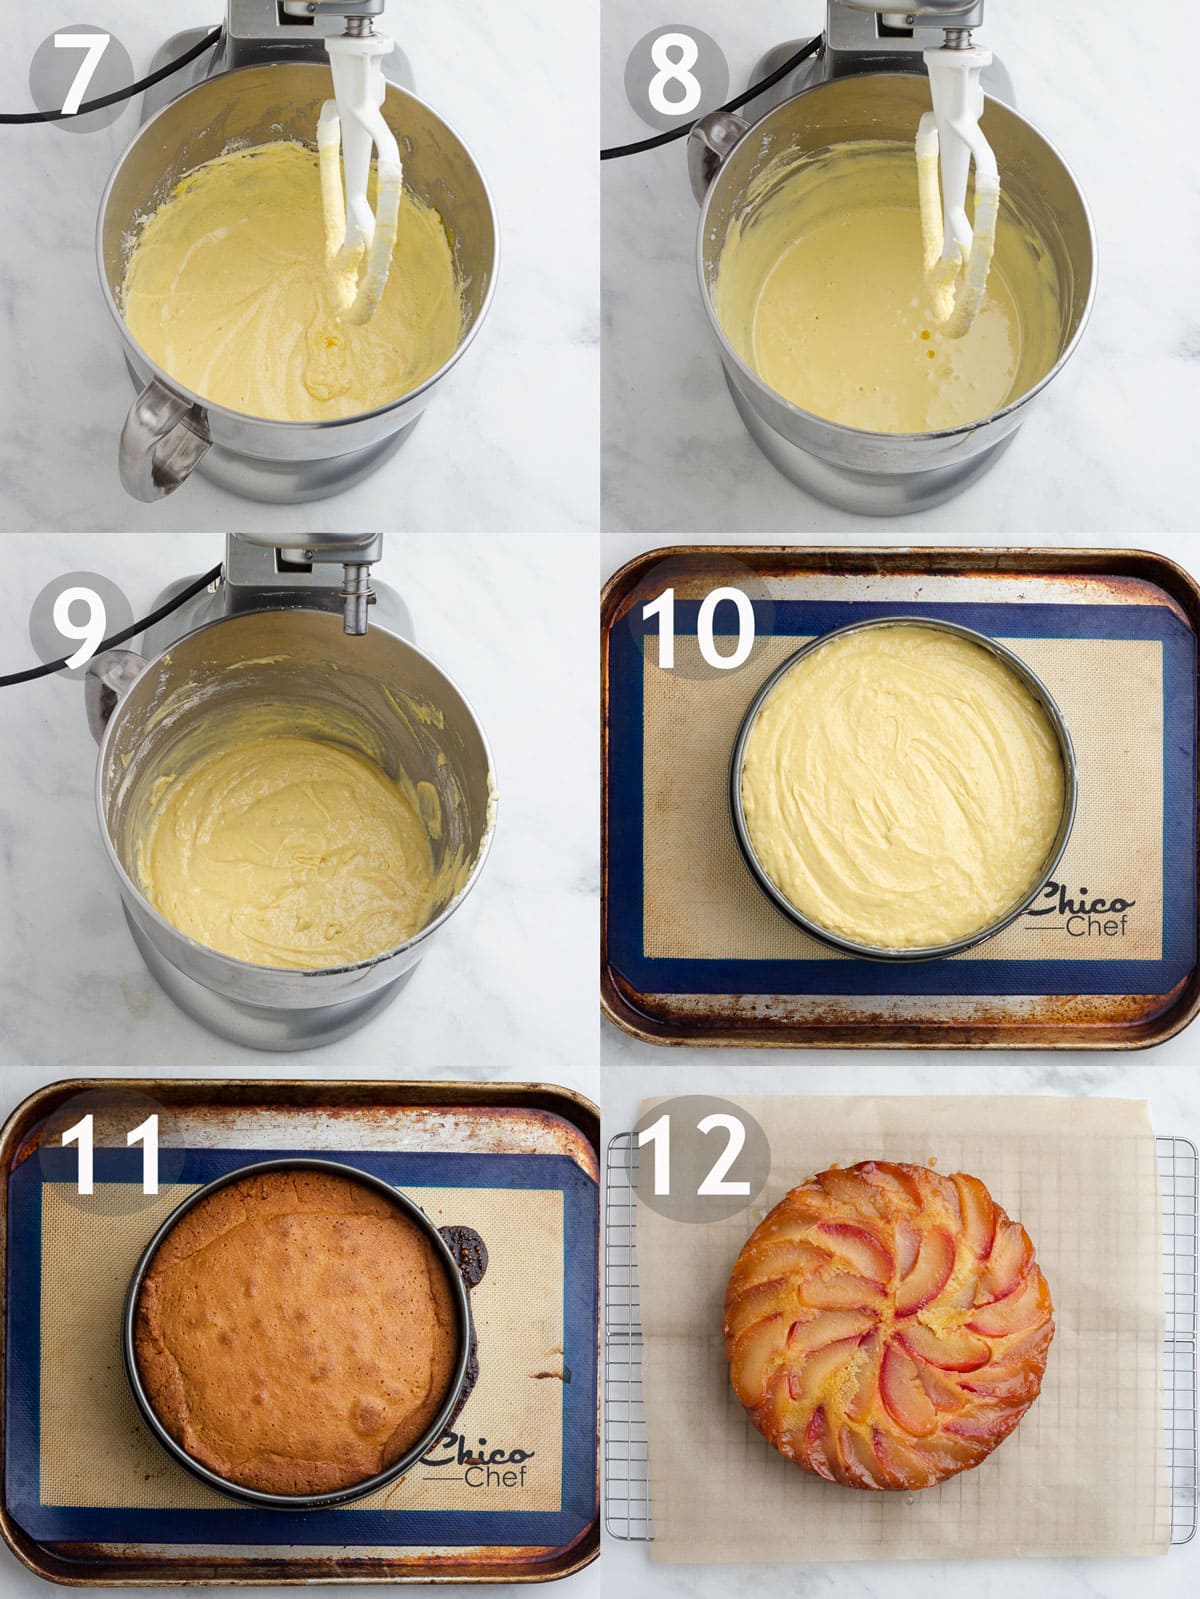 Steps to make cake including mixing wet ingredients, adding dry ingredients and baking cake.